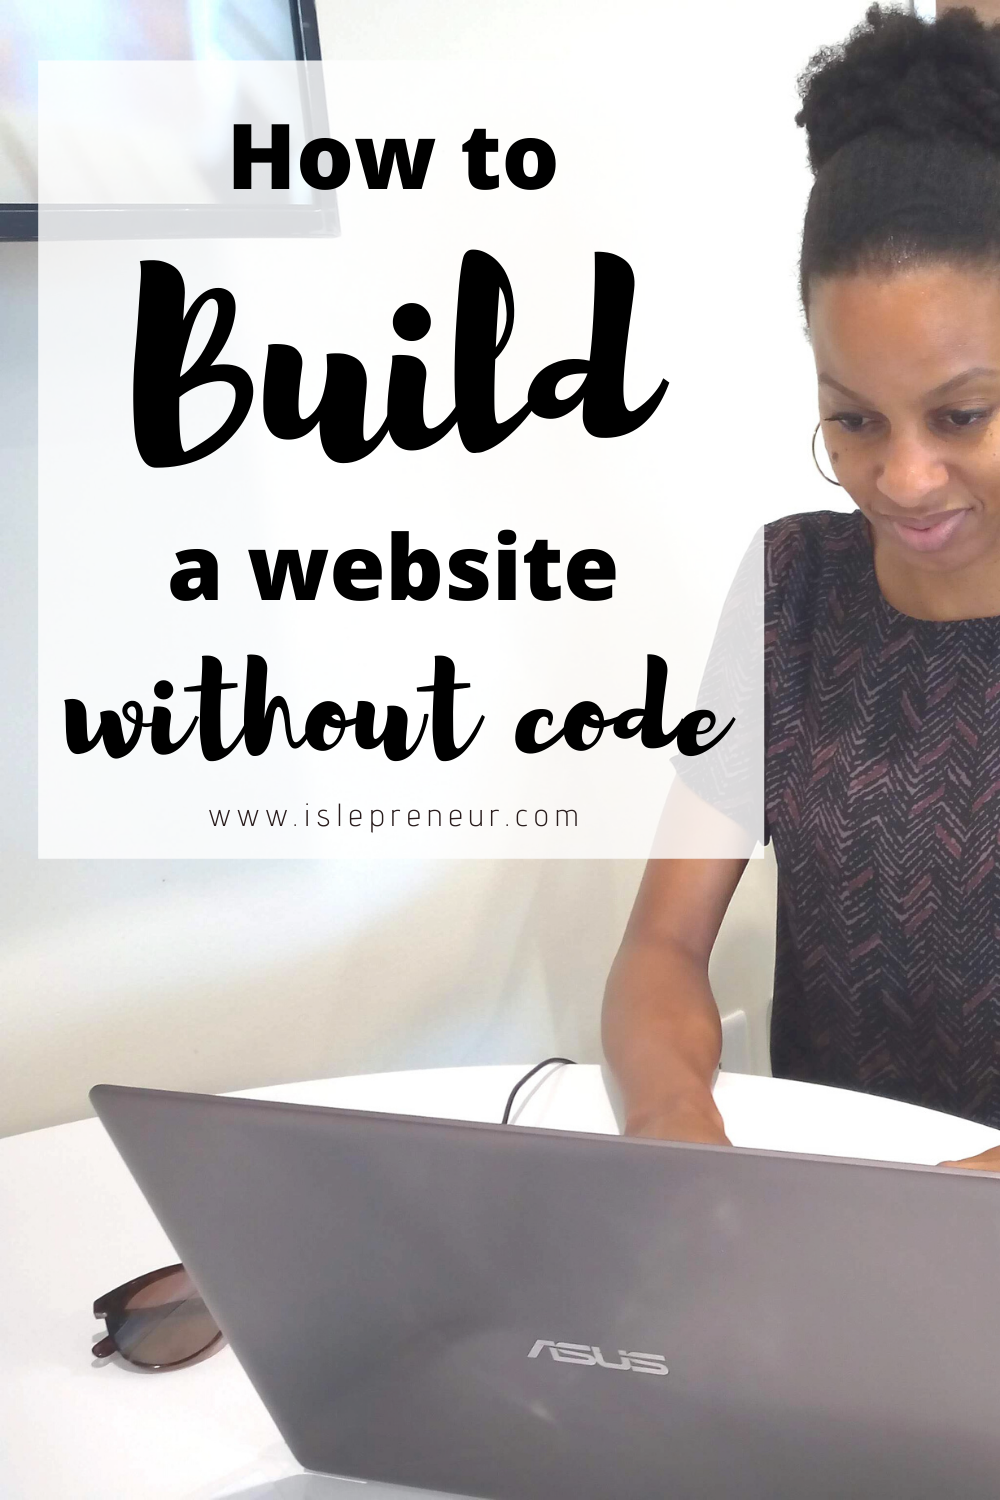 How to build a website | Islepreneur